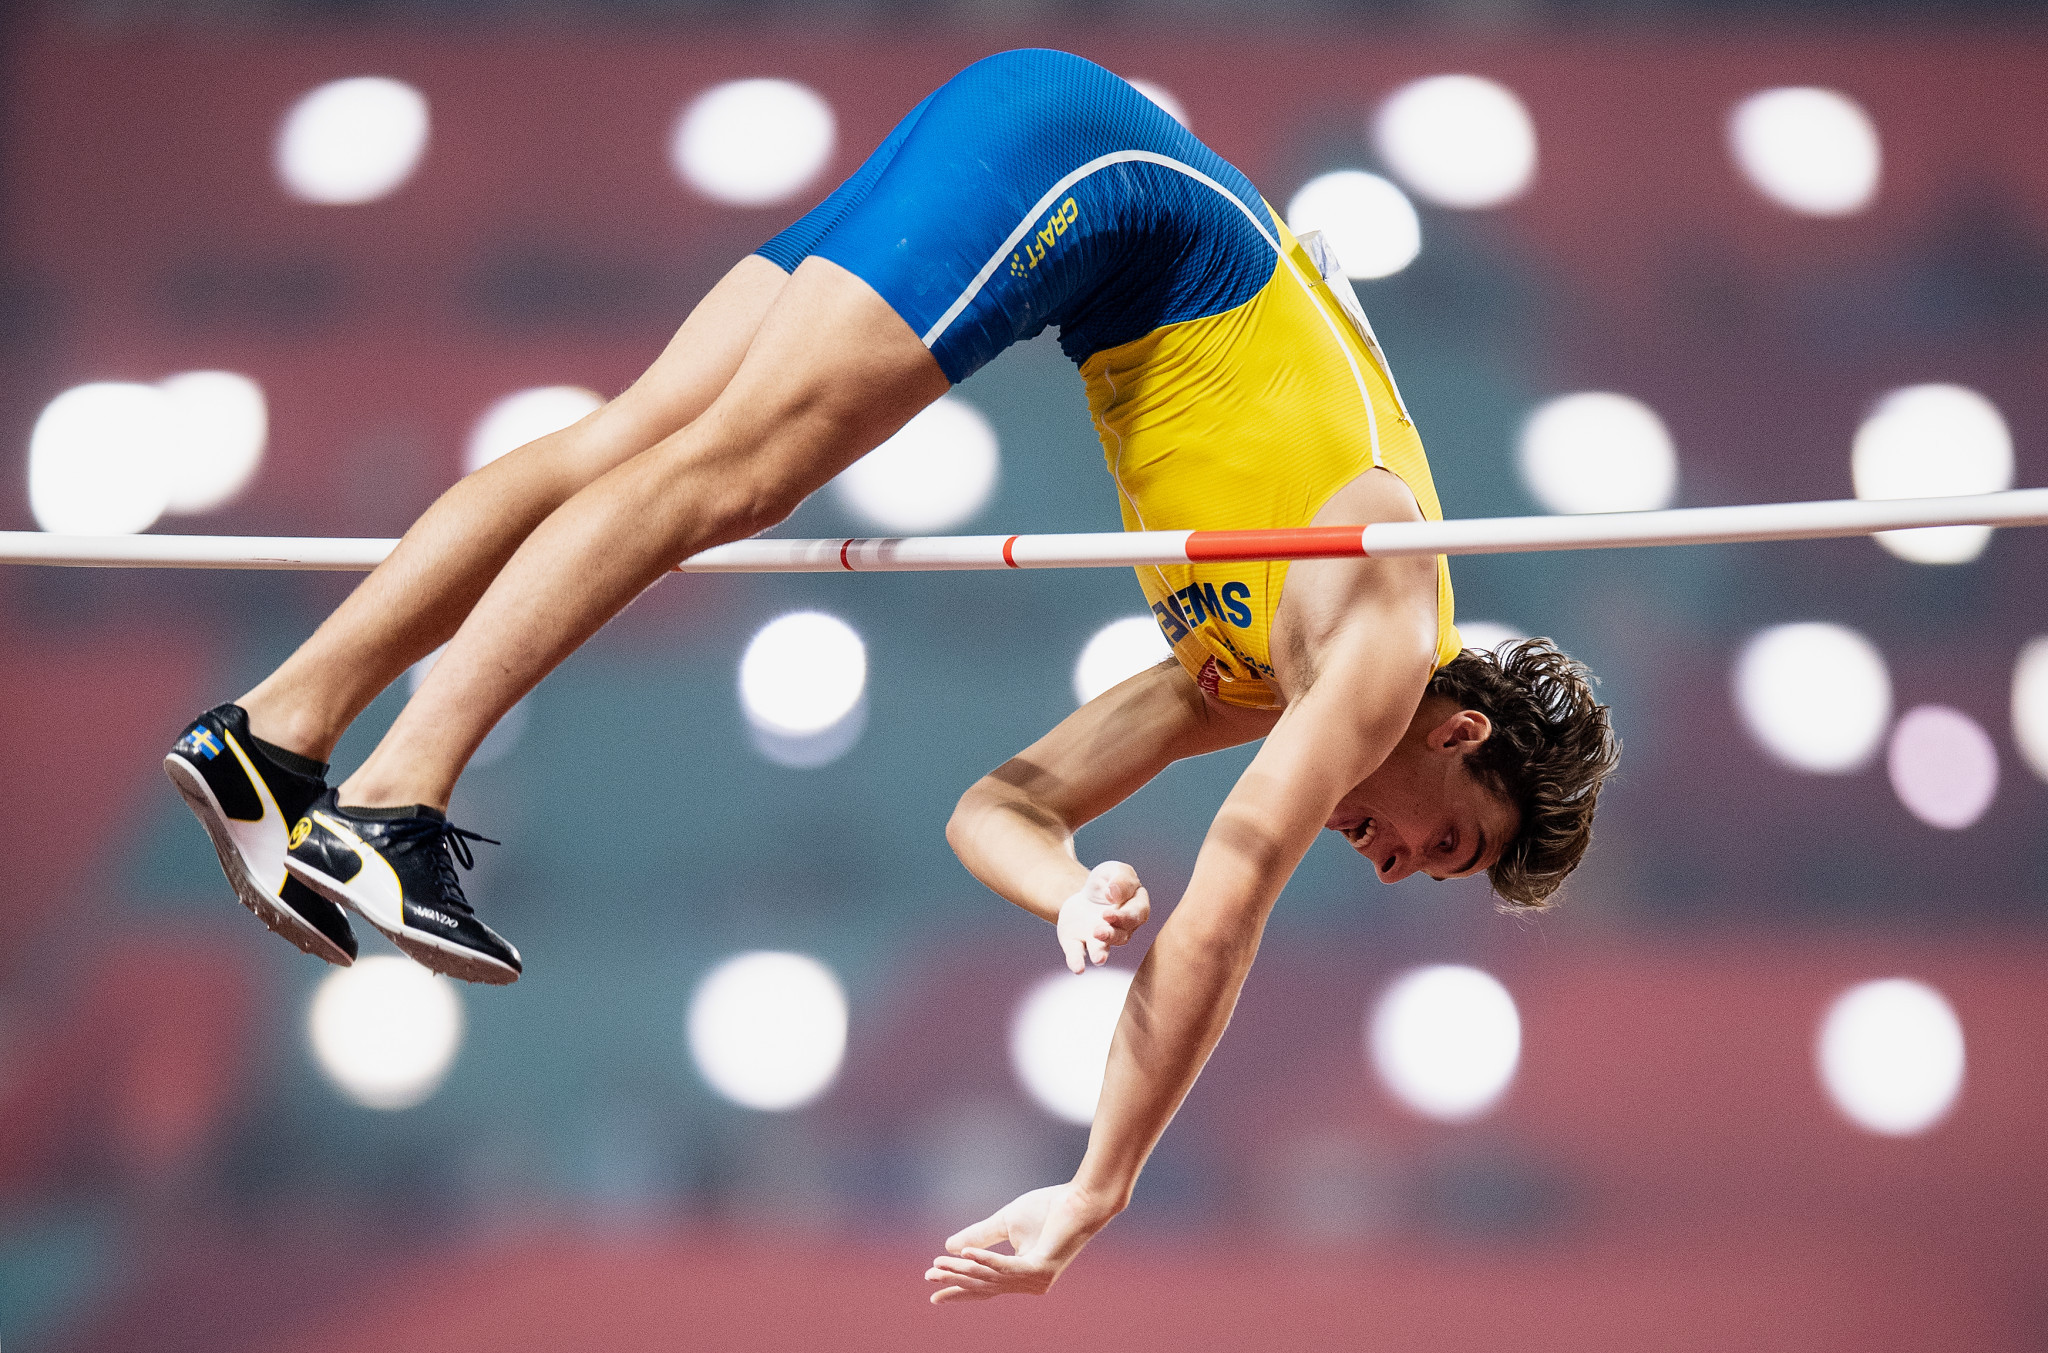 Armand Duplantis will make his first appearance of the seaosn in Düsseldorf ©Getty Images